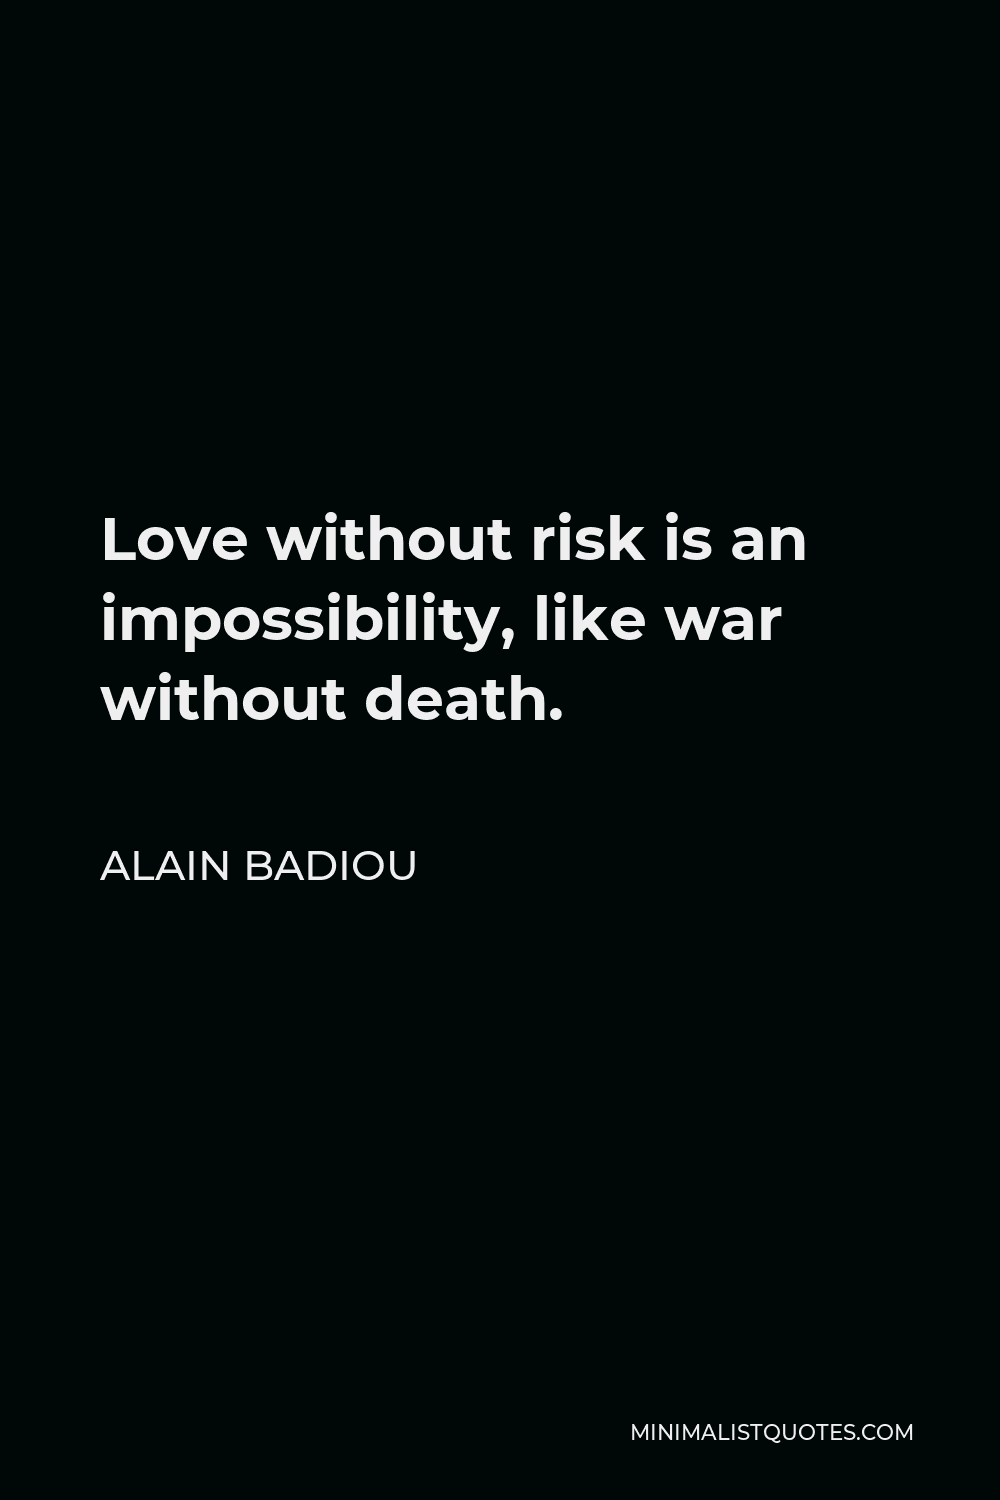 Alain Badiou Quote - Love without risk is an impossibility, like war without death.